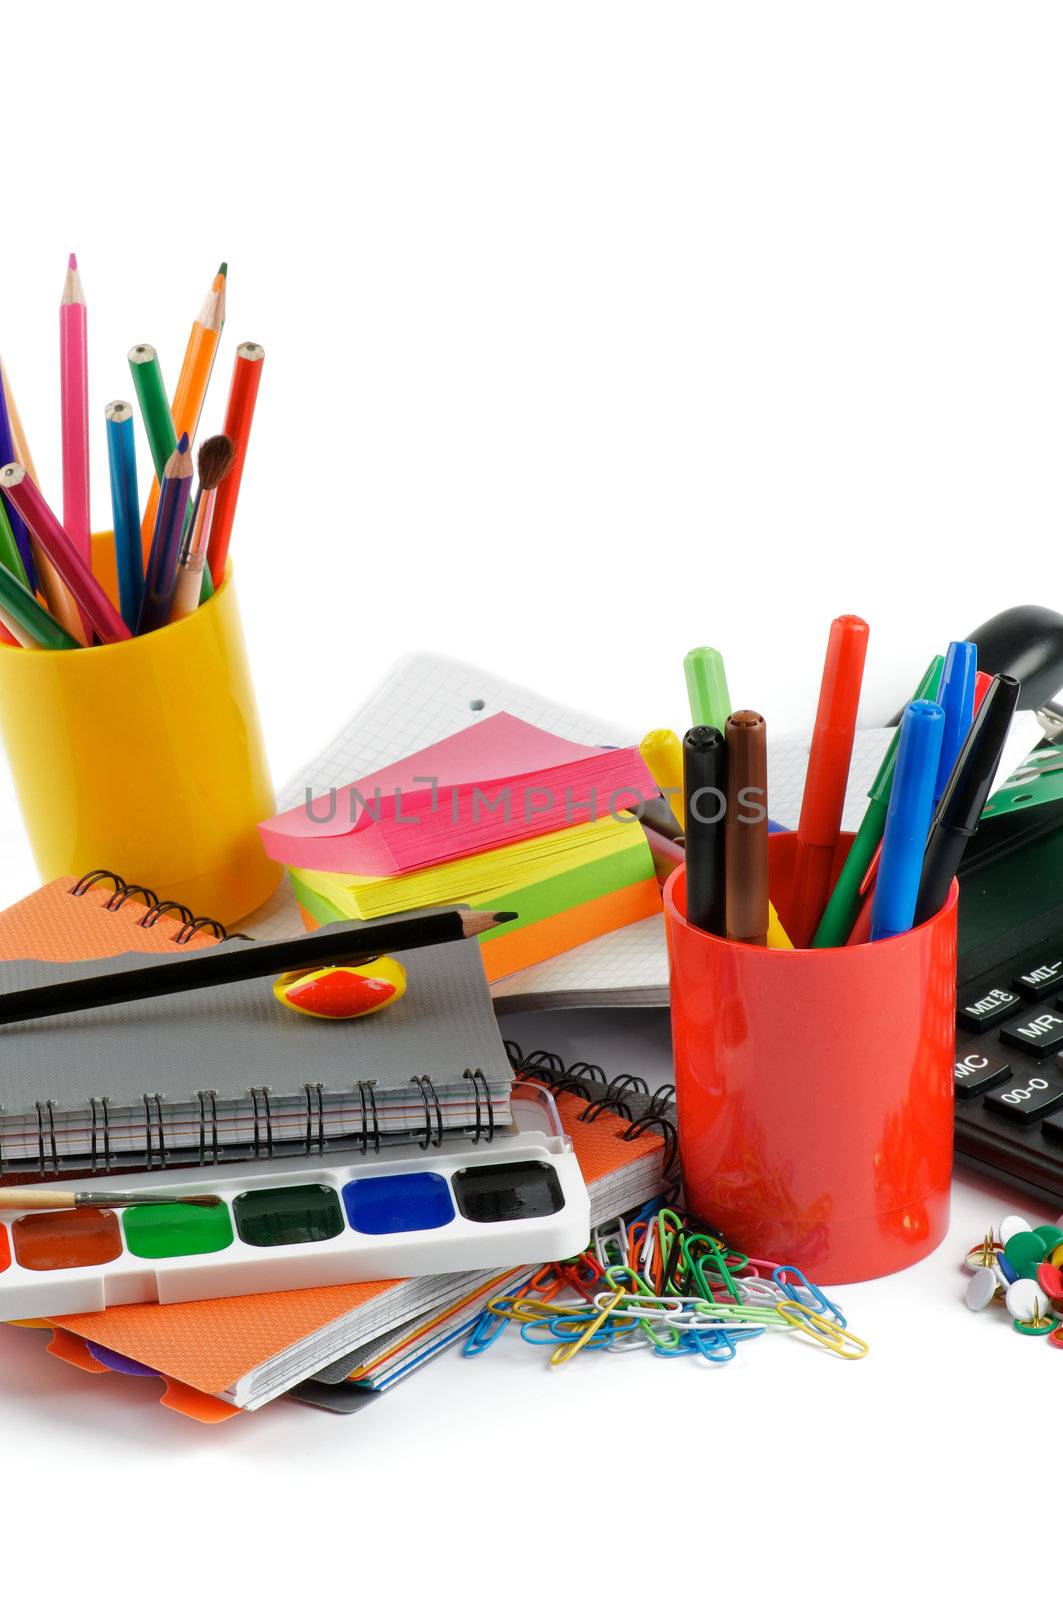 School supplies. Ballpoint Pens, Colored Pencils, Paintbrush, Felt Tip Pens, Pencil Sharpener, Watercolor Paints, Paper Clips, Calculator, Stapler, Ruler, Protractor, Notebooks and Sticky Notes